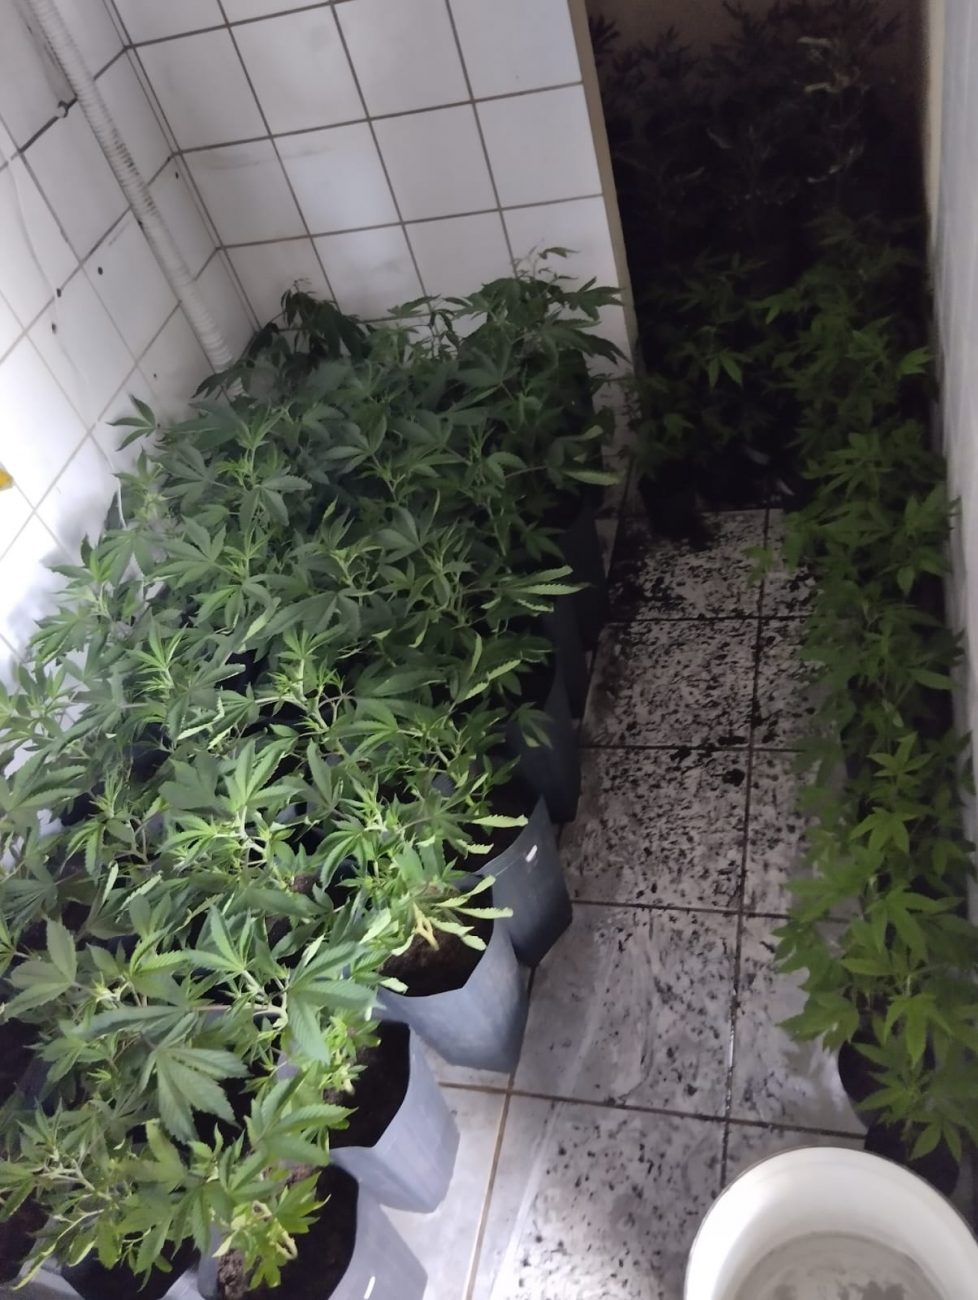 Marijuana plants were in another room - PMSC/Disclosure/ND